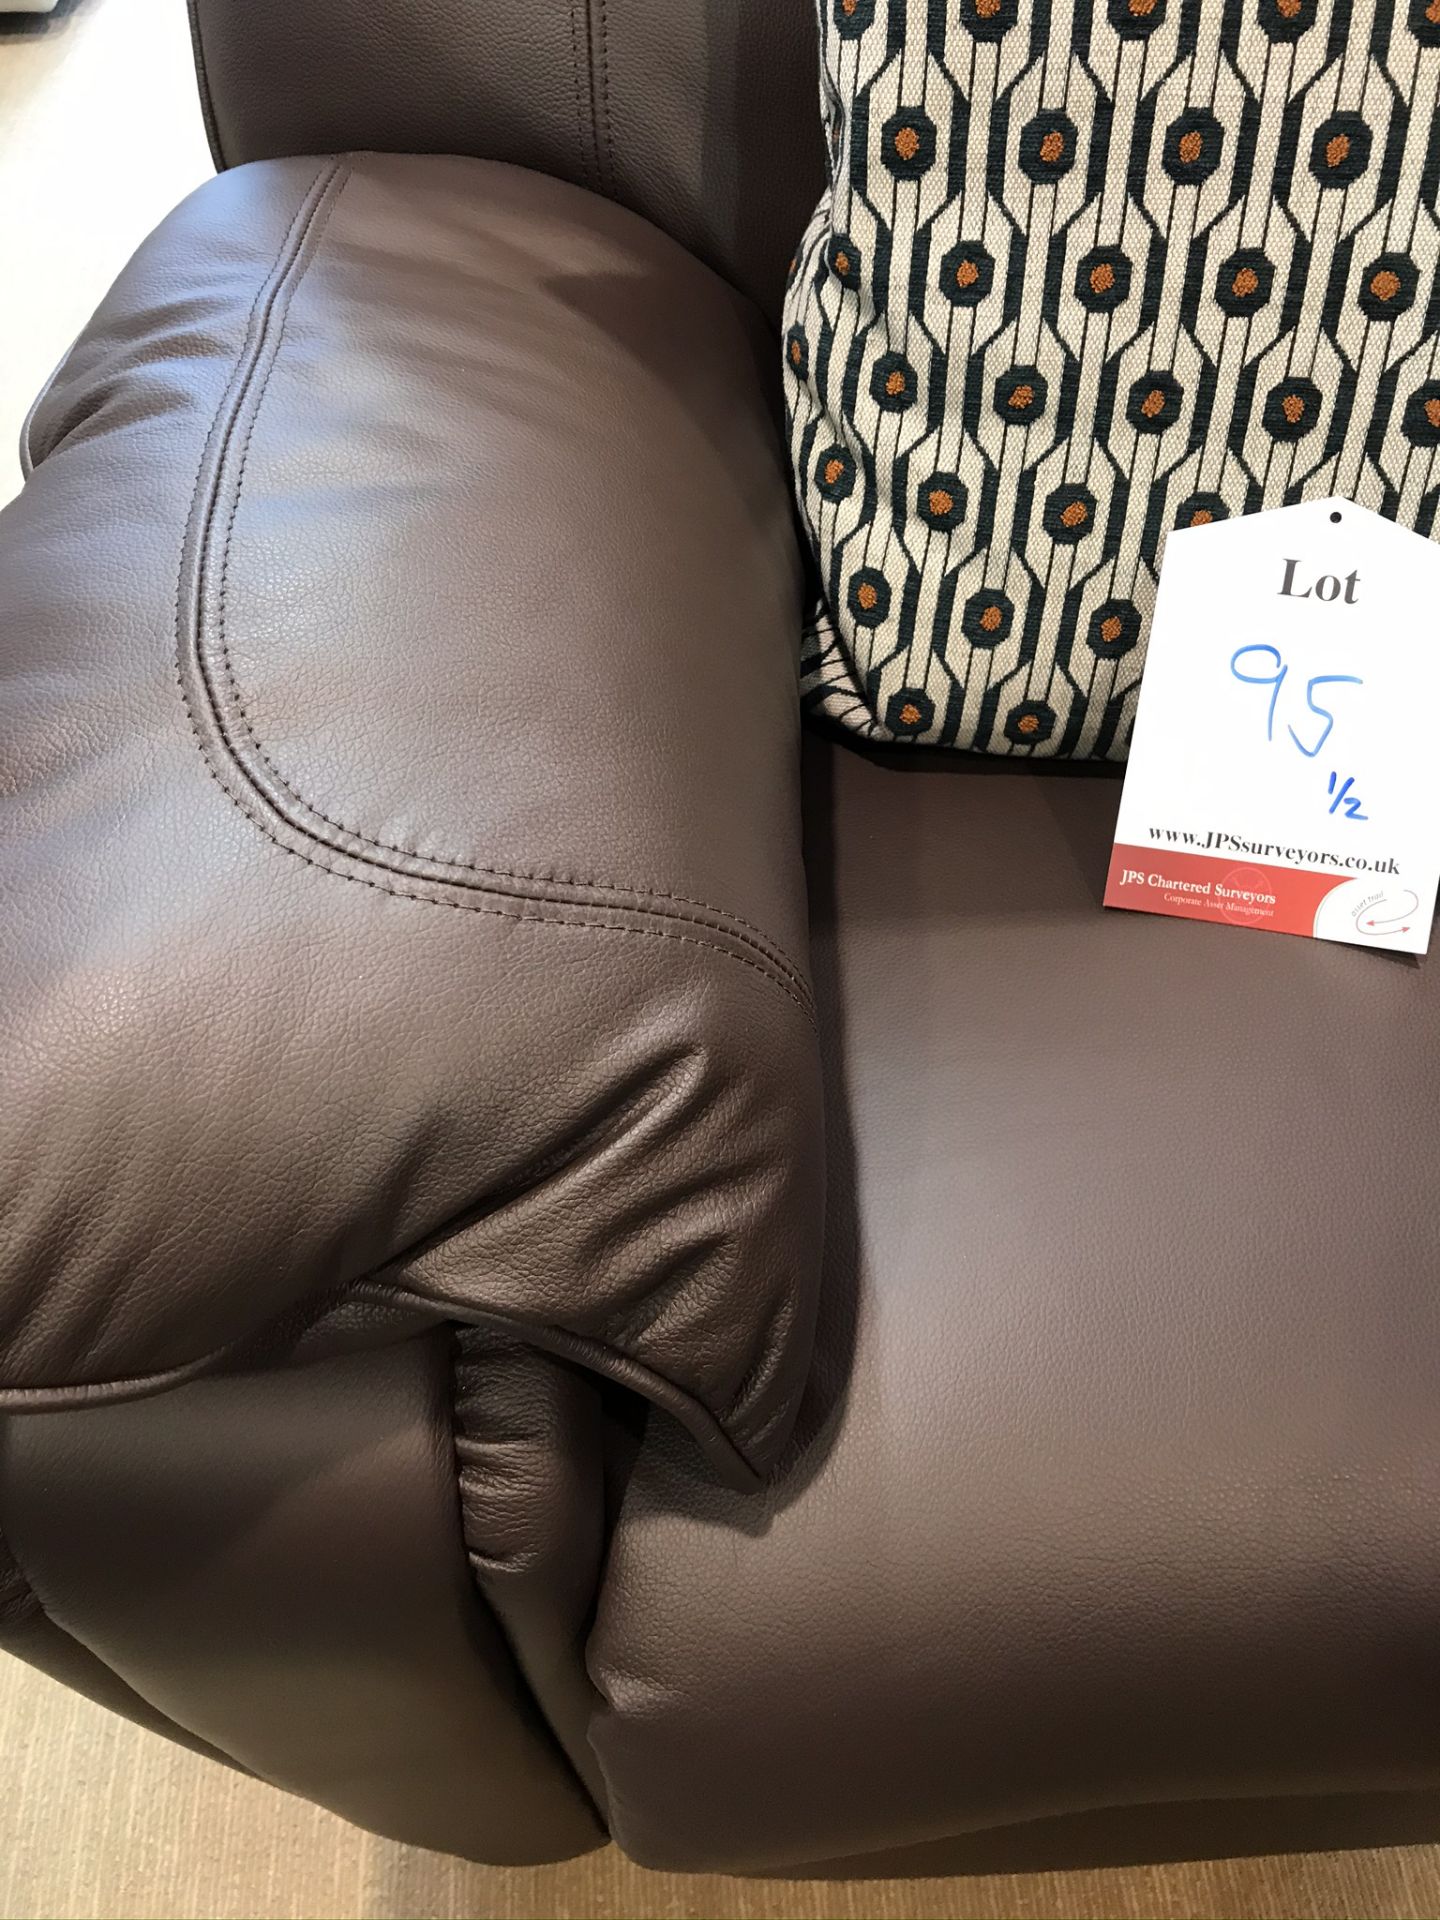 Ex Display G Plan Henley Leather 3 Seater Sofa & Electric Reclining Chair - Oxford Chocolate - RRP£4 - Image 3 of 4